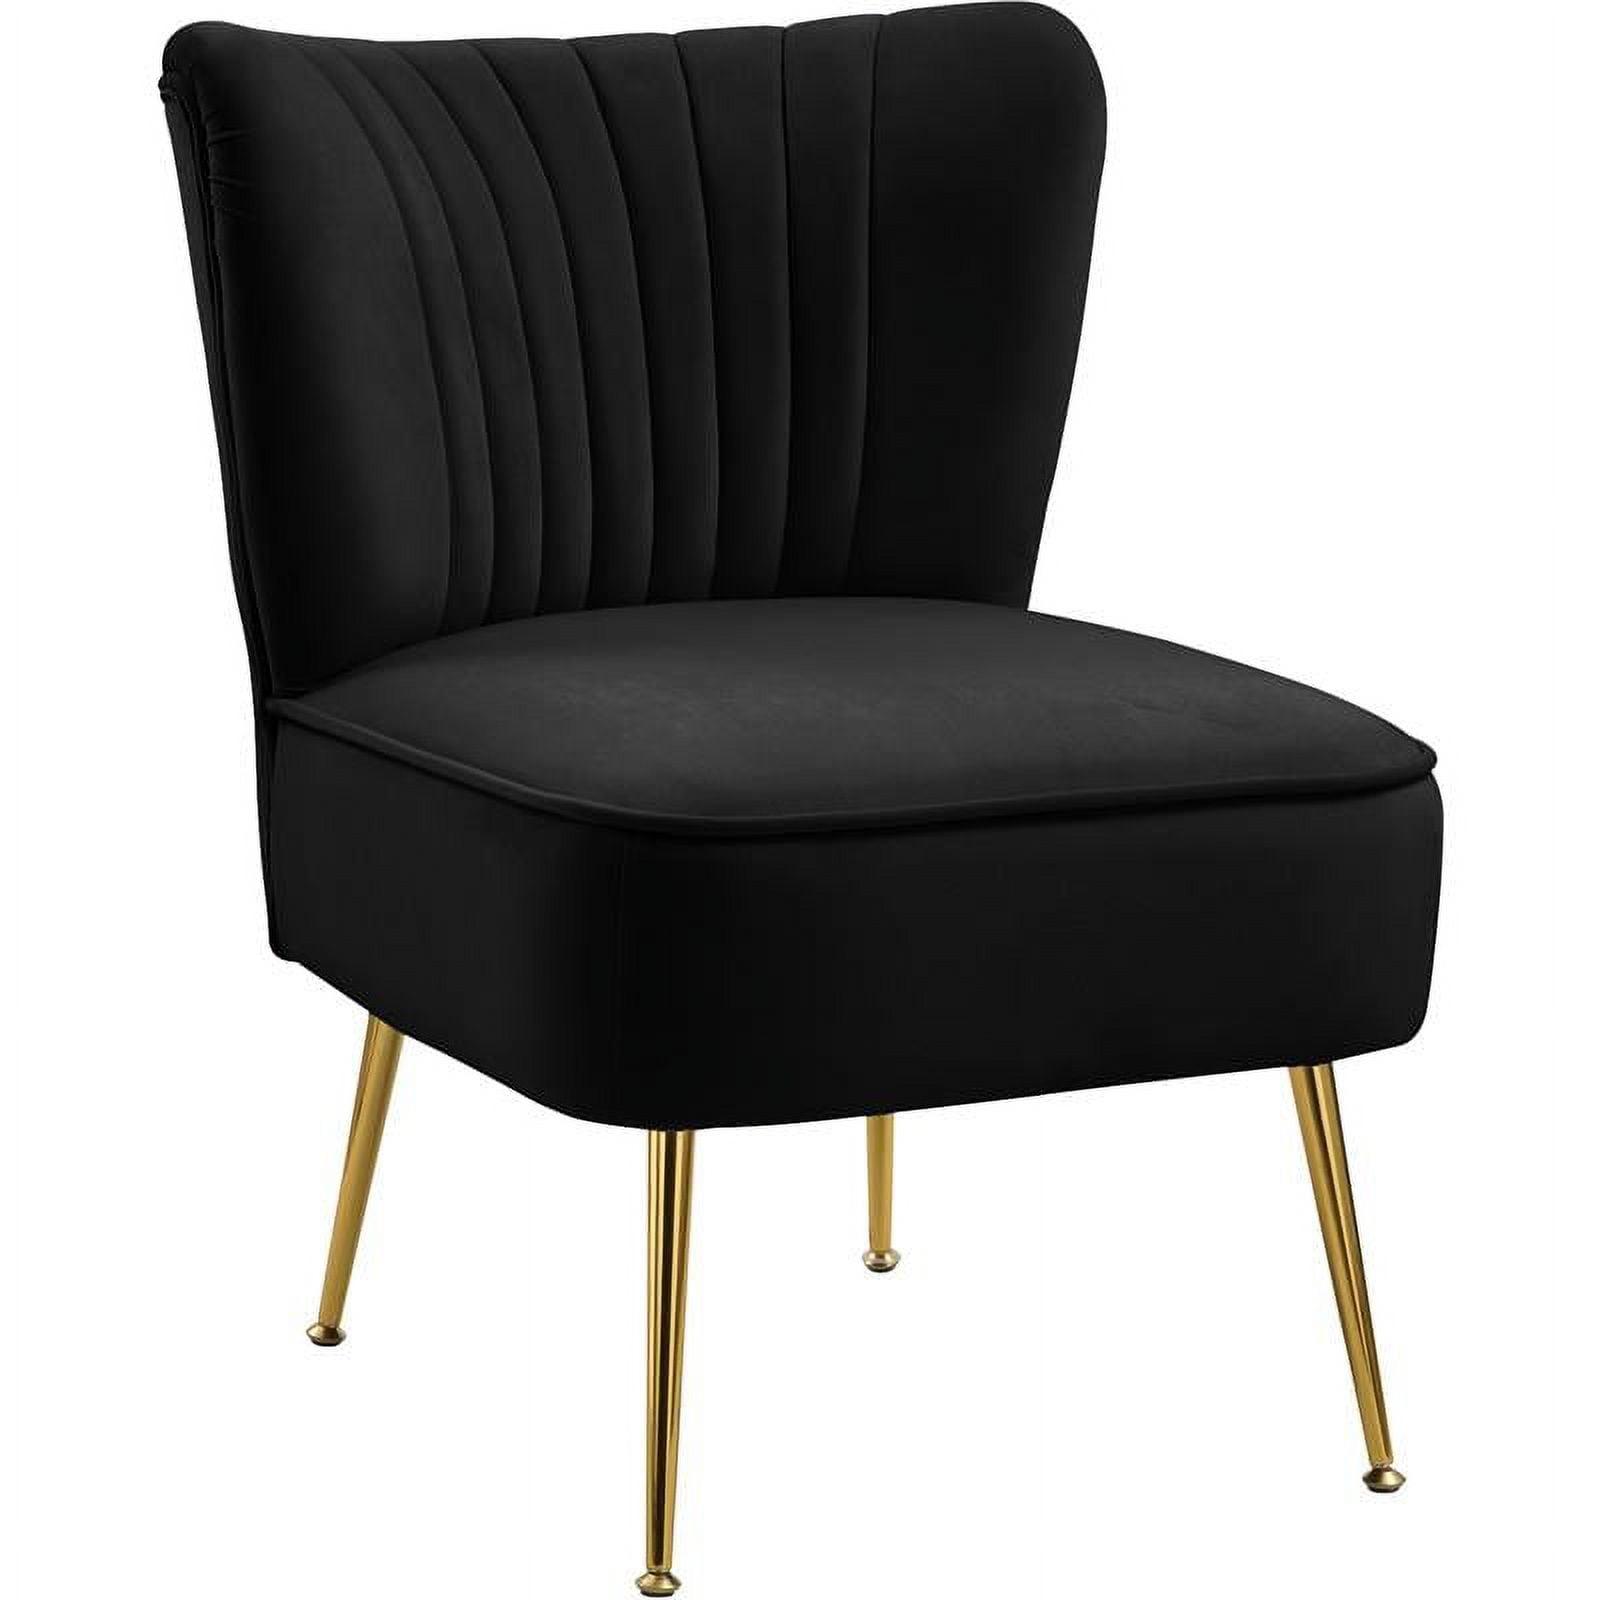 Tess Black Velvet Accent Chair with Gold Legs